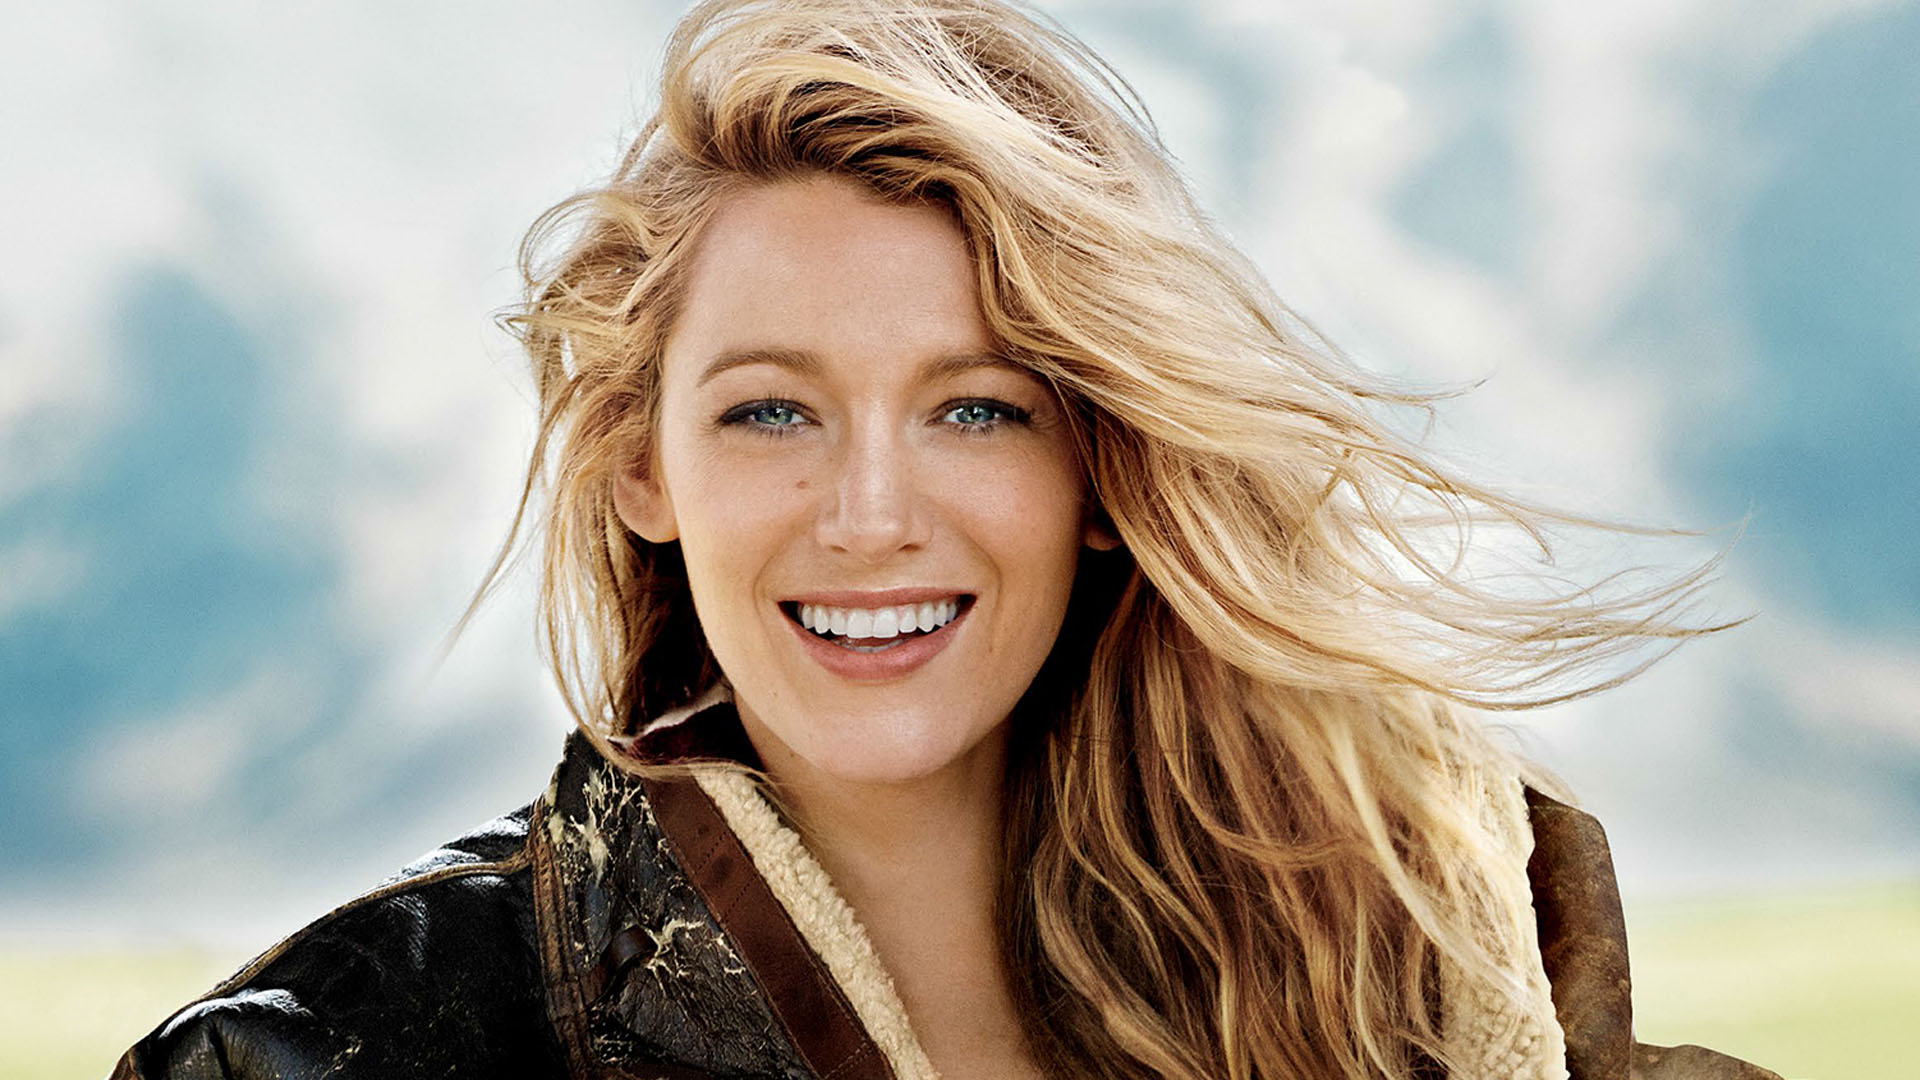 Free download HD Blake Lively Wallpapers HdCoolWallpapersCom [1920x1080]  for your Desktop, Mobile & Tablet | Explore 93+ Blake Lively Wallpapers |  Blake Griffin Wallpapers, Blake Griffin Dunk Wallpaper, RWBY Blake Wallpaper